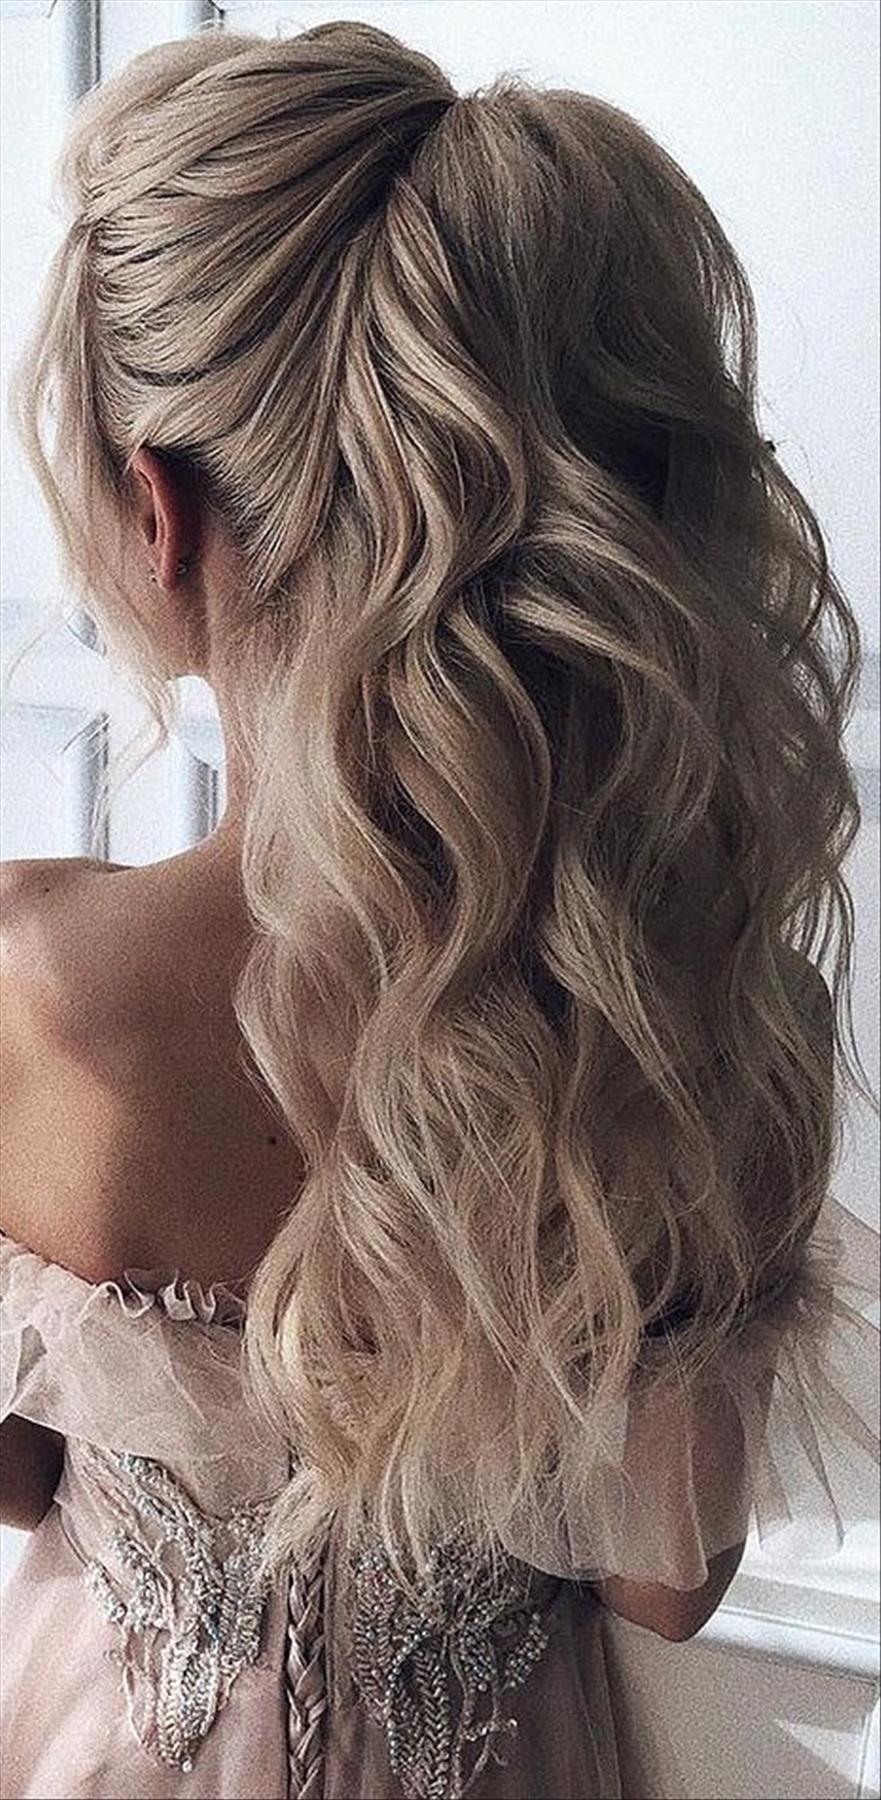 Romantic Wedding Hairstyles For Bride You’re Gonna Love